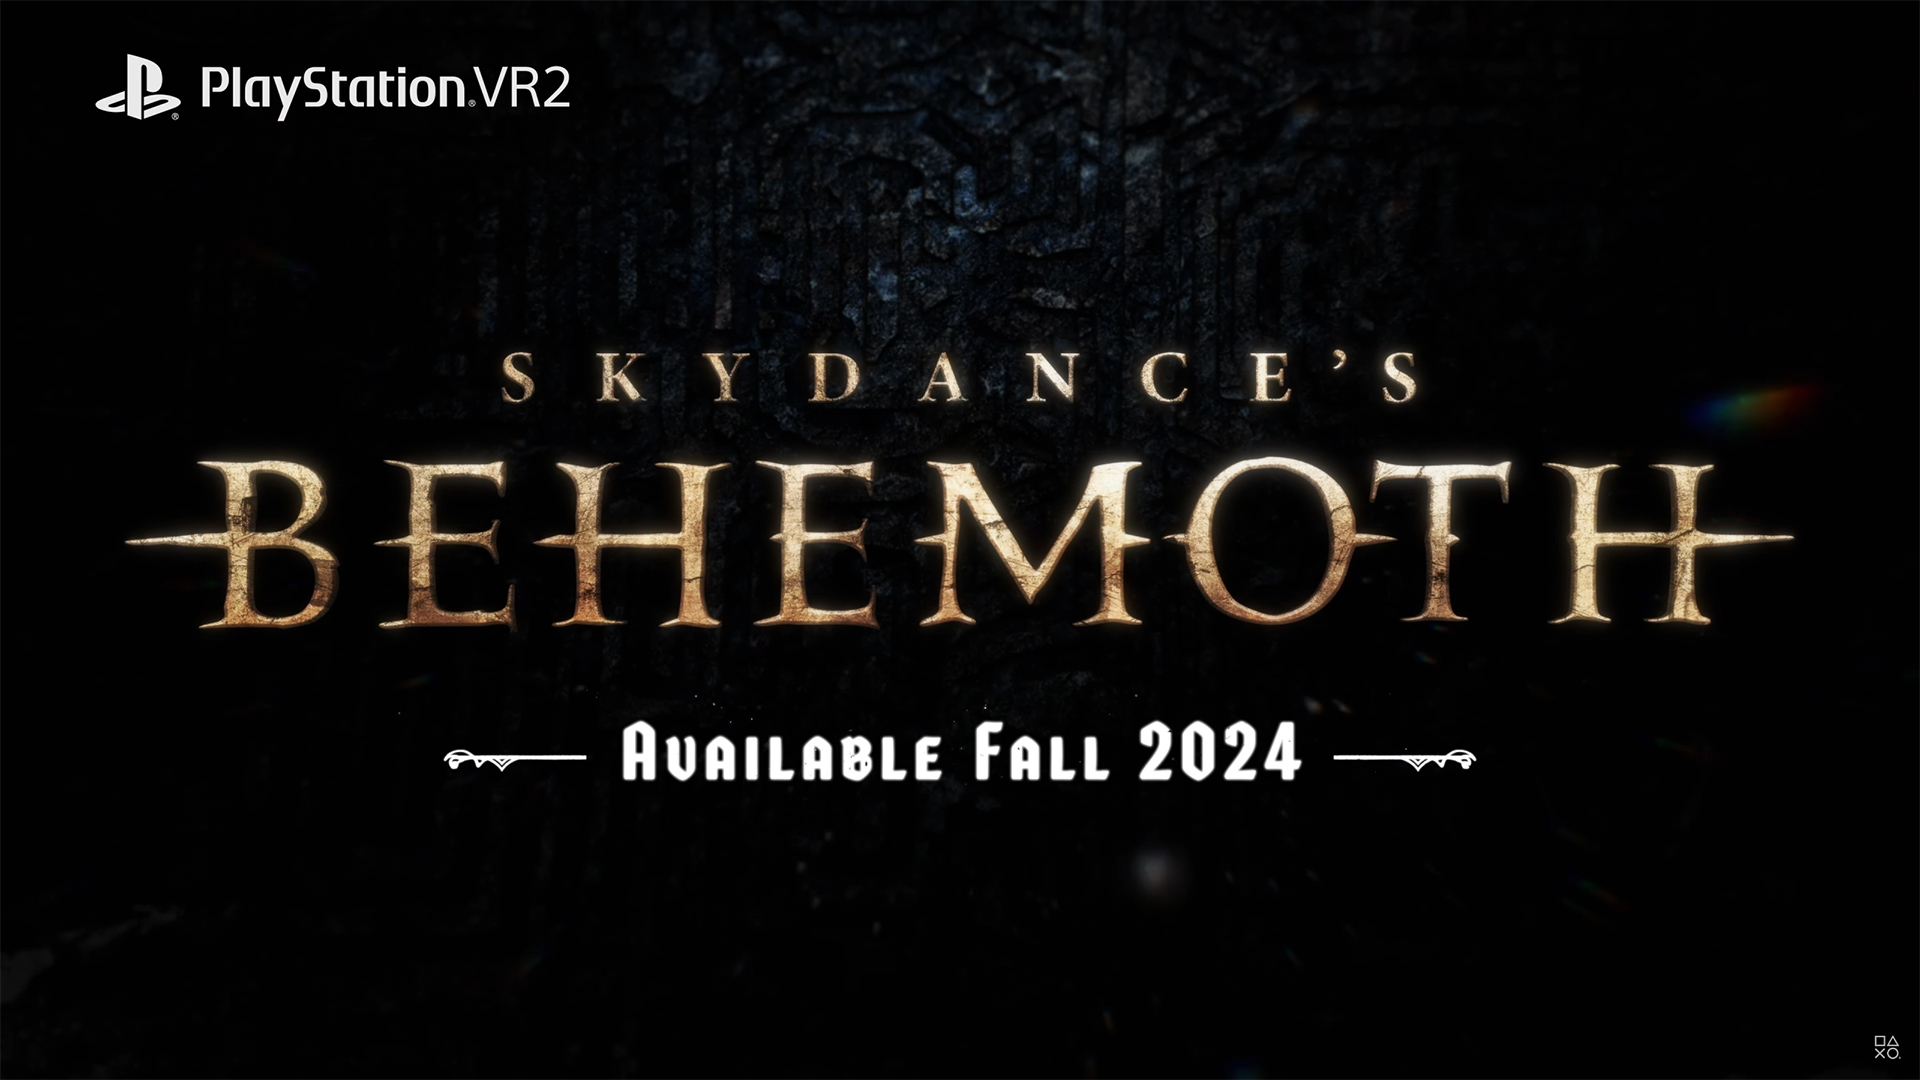 Skydance's Behemoth heads to PlayStation VR2 this fall